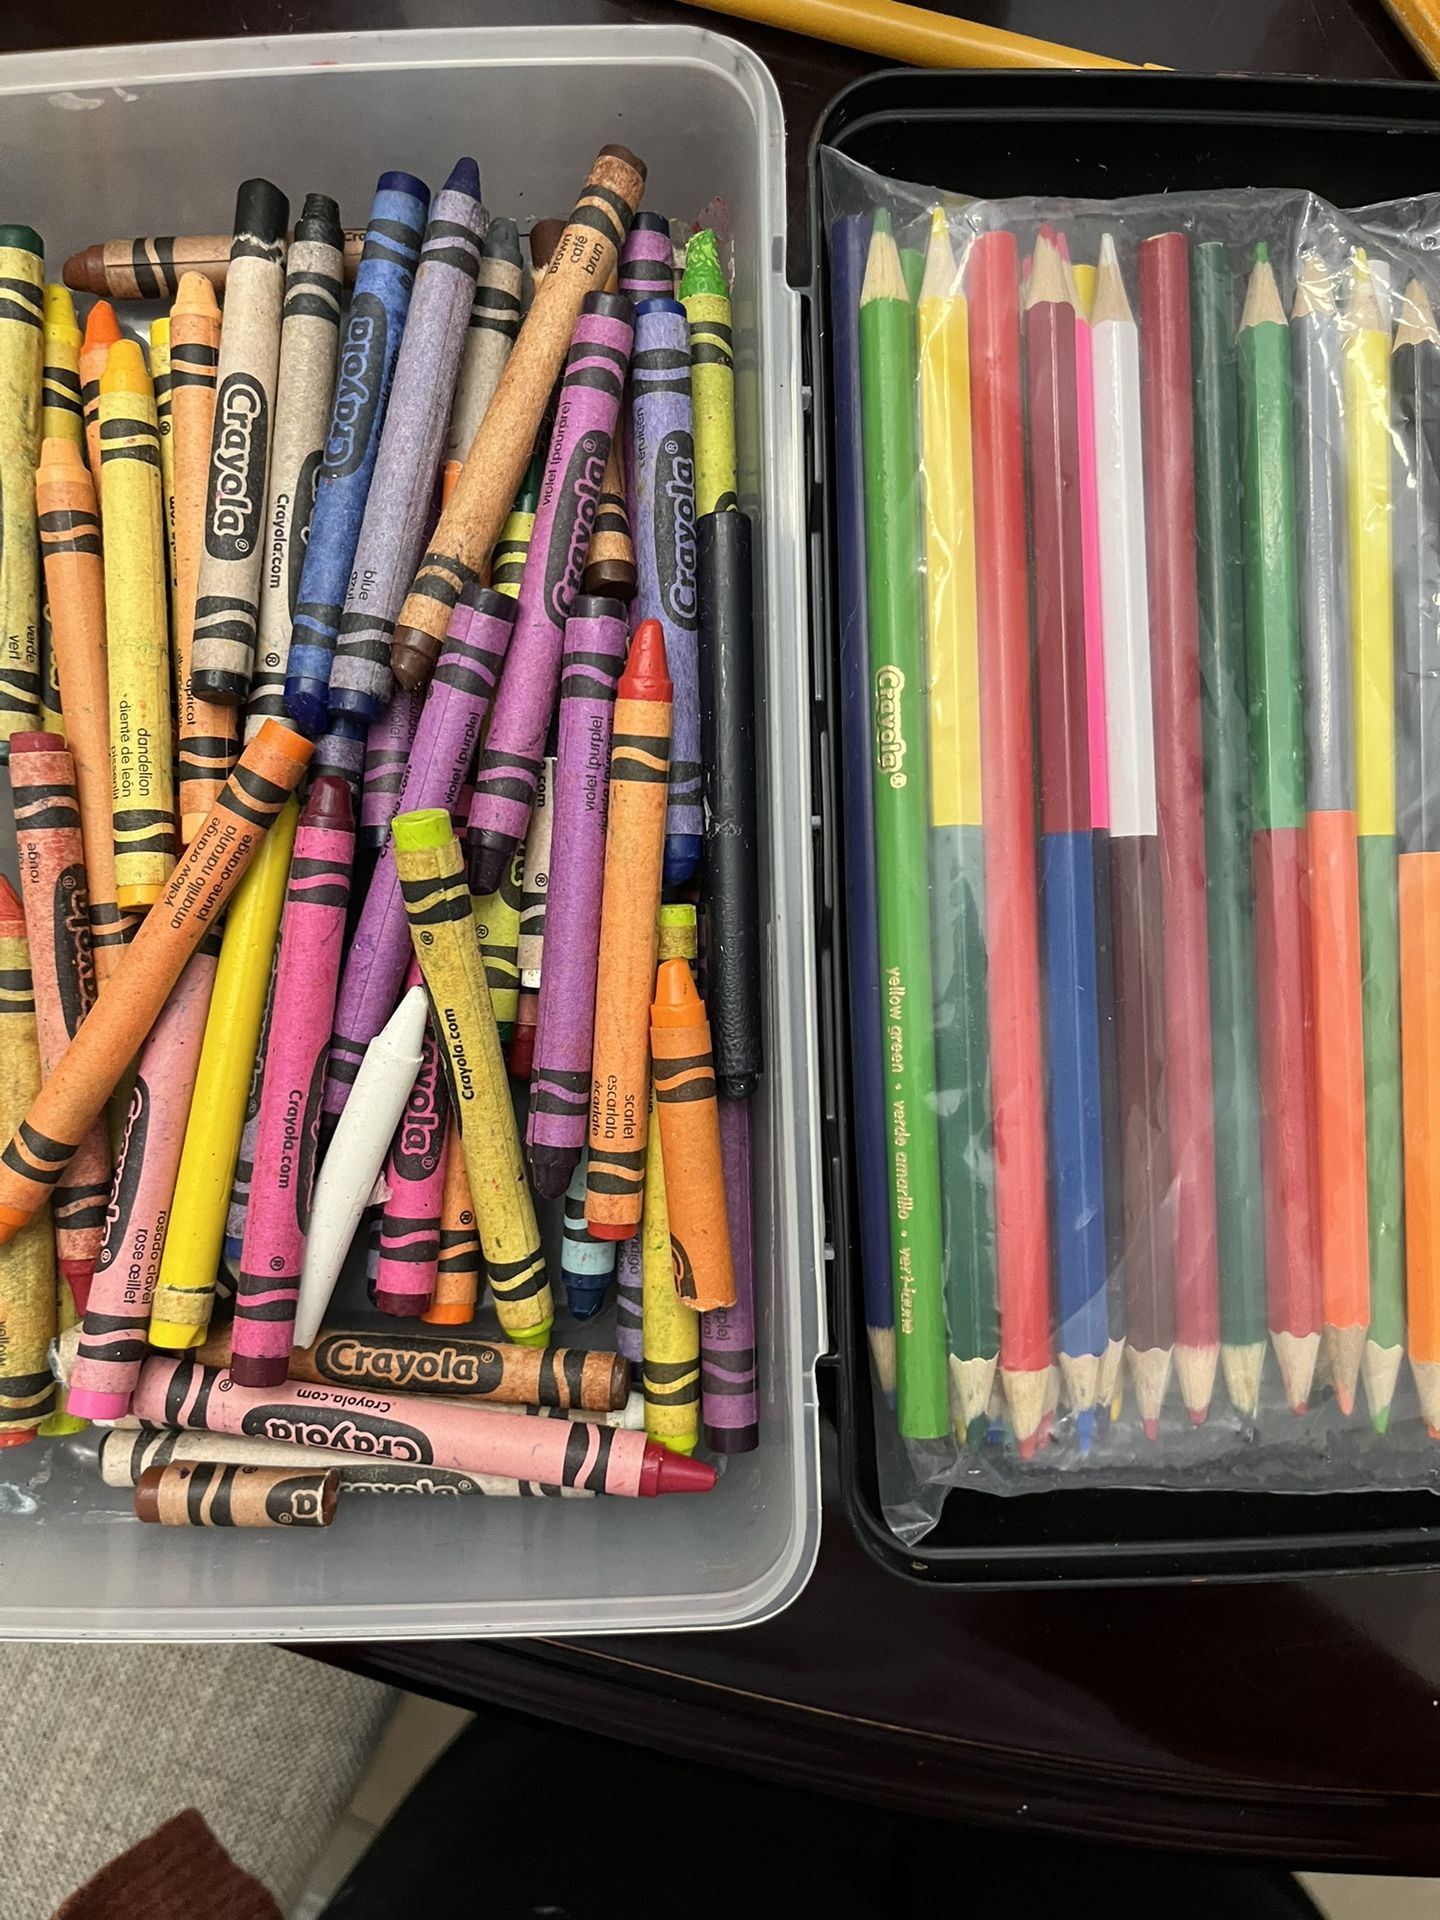 Free Crayons, Colored Pencils & Kite